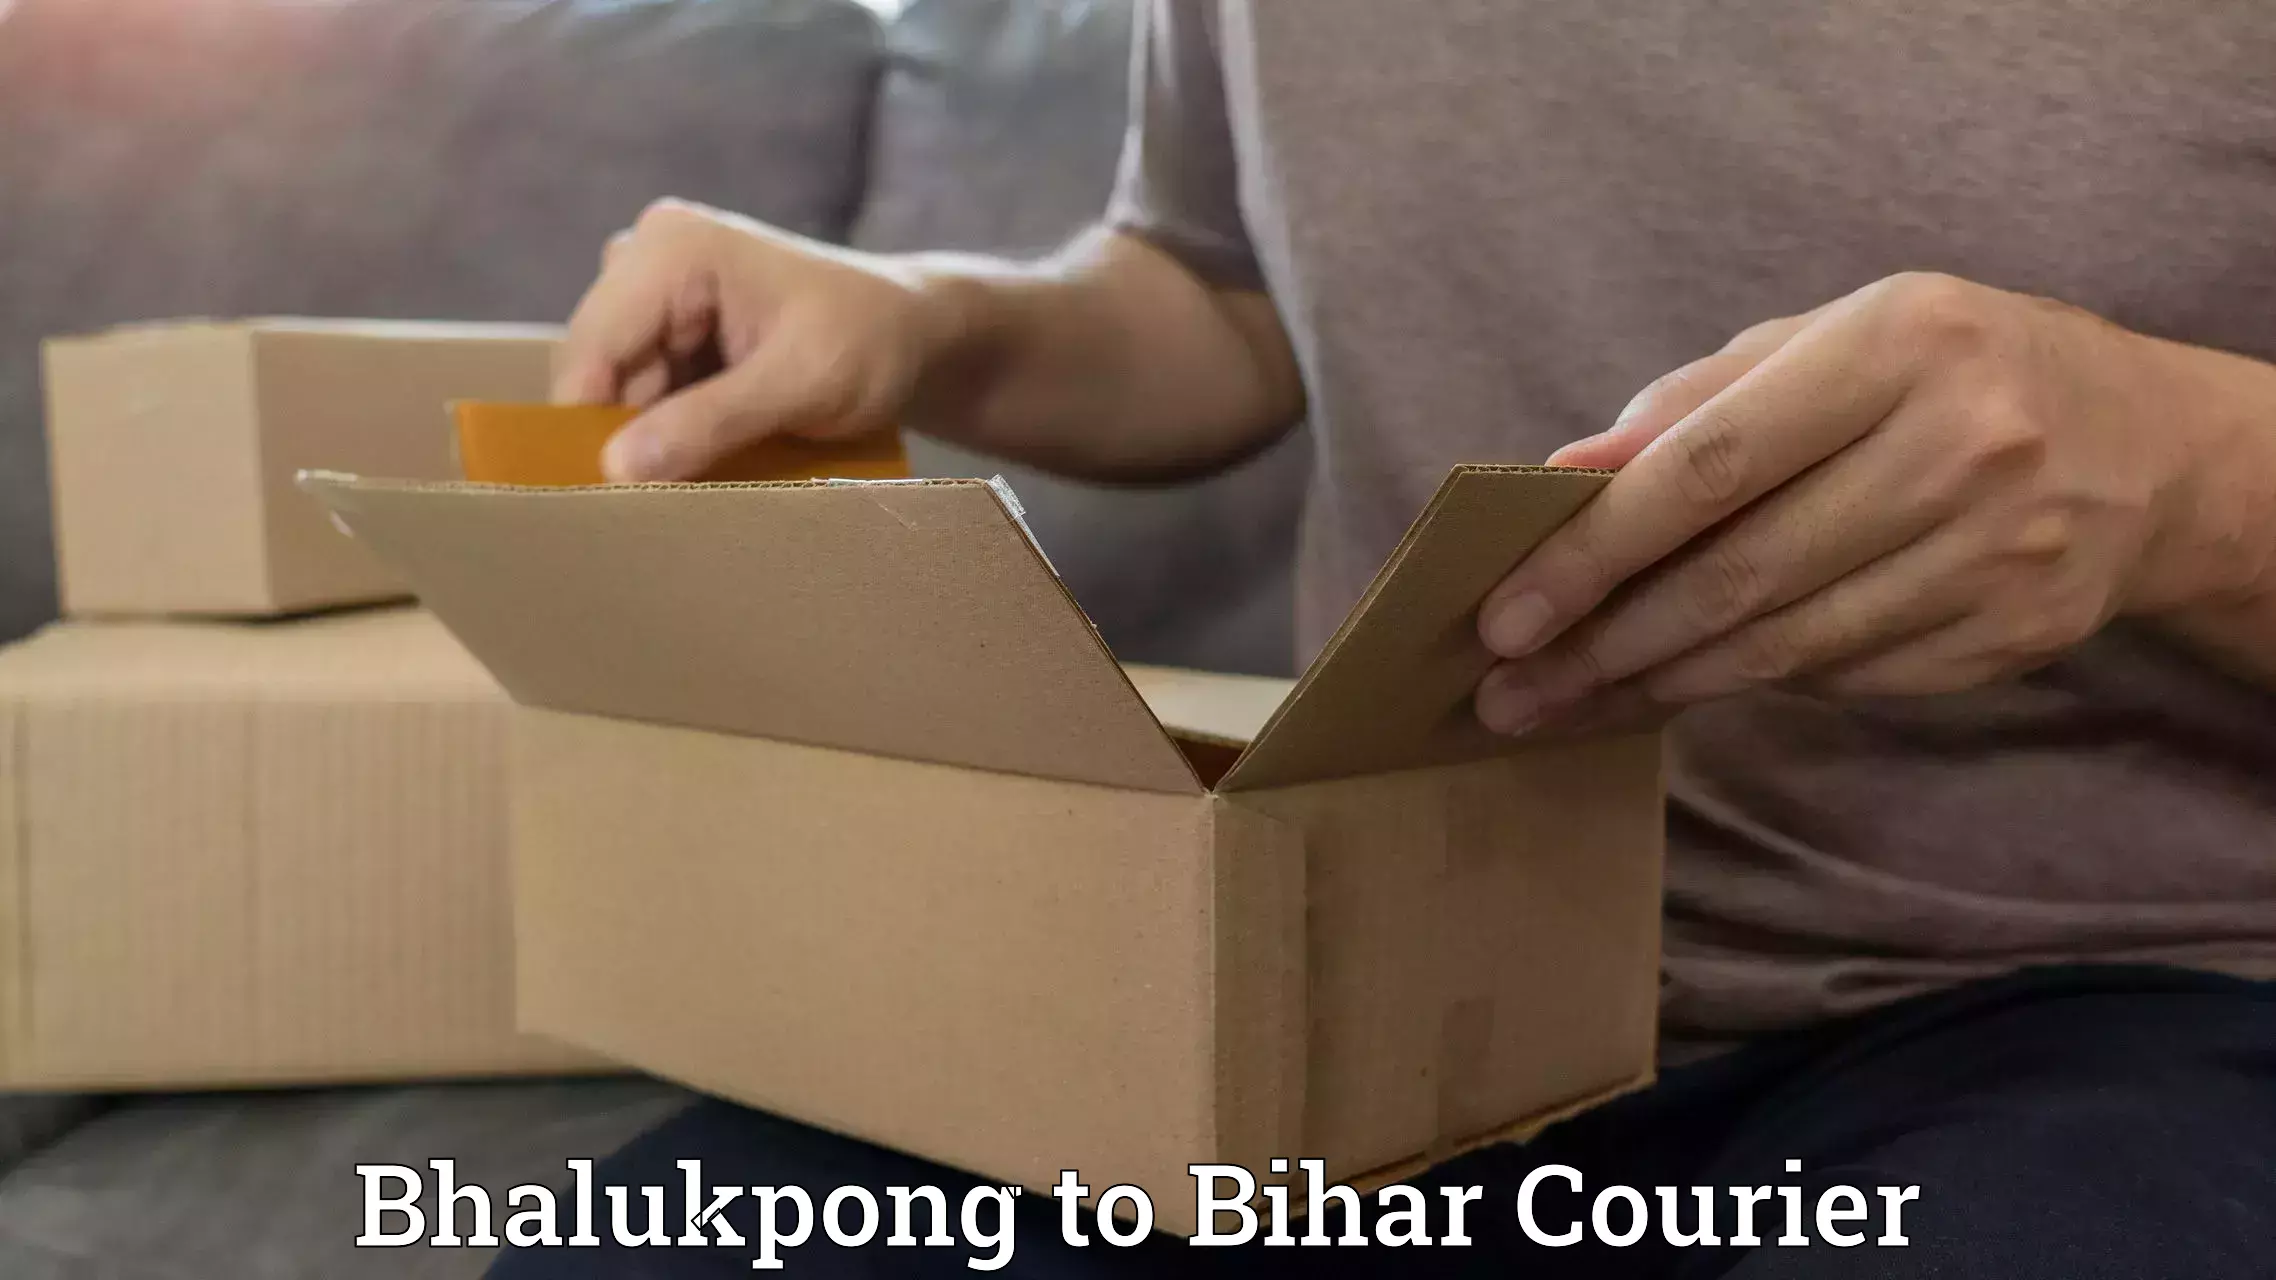 Advanced shipping technology Bhalukpong to Bankipore